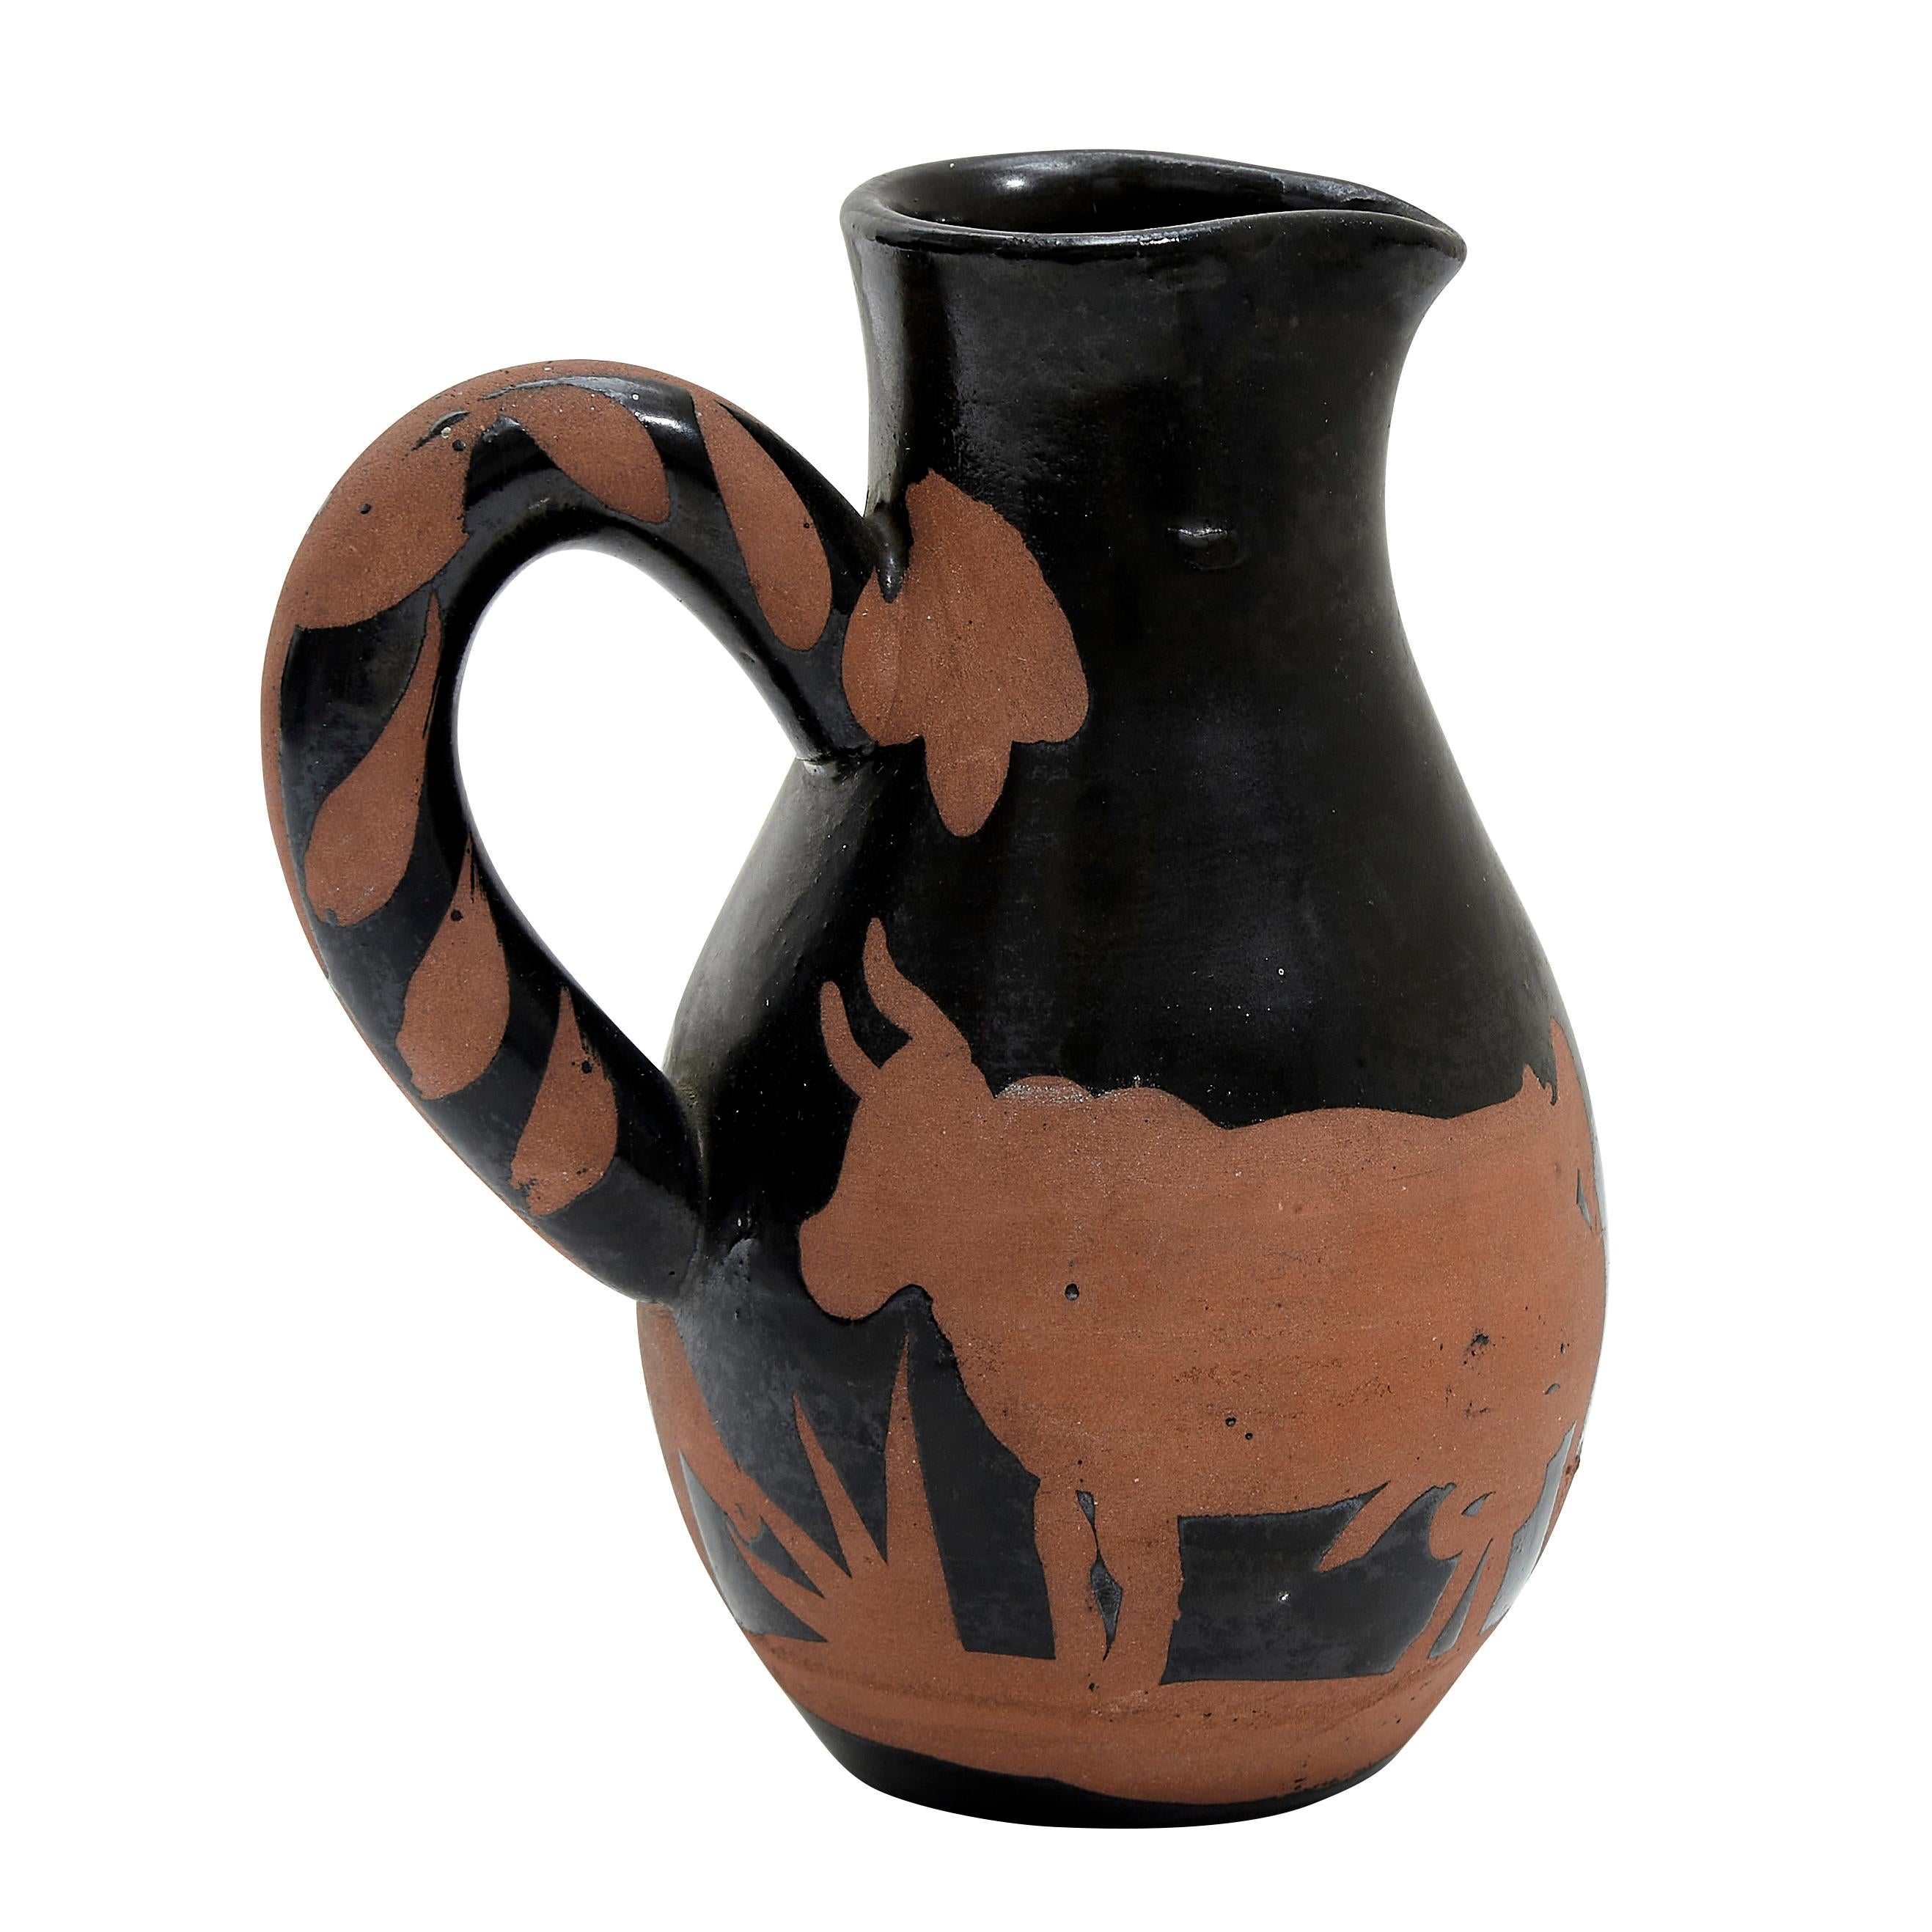 PABLO PICASSO (1881-1973) 
Picador (A. R. 162) 

Terre de faïence pitcher, 1952, from the edition of 500, incised 'Edition Picasso' and 'Madoura', partially glazed and painted.